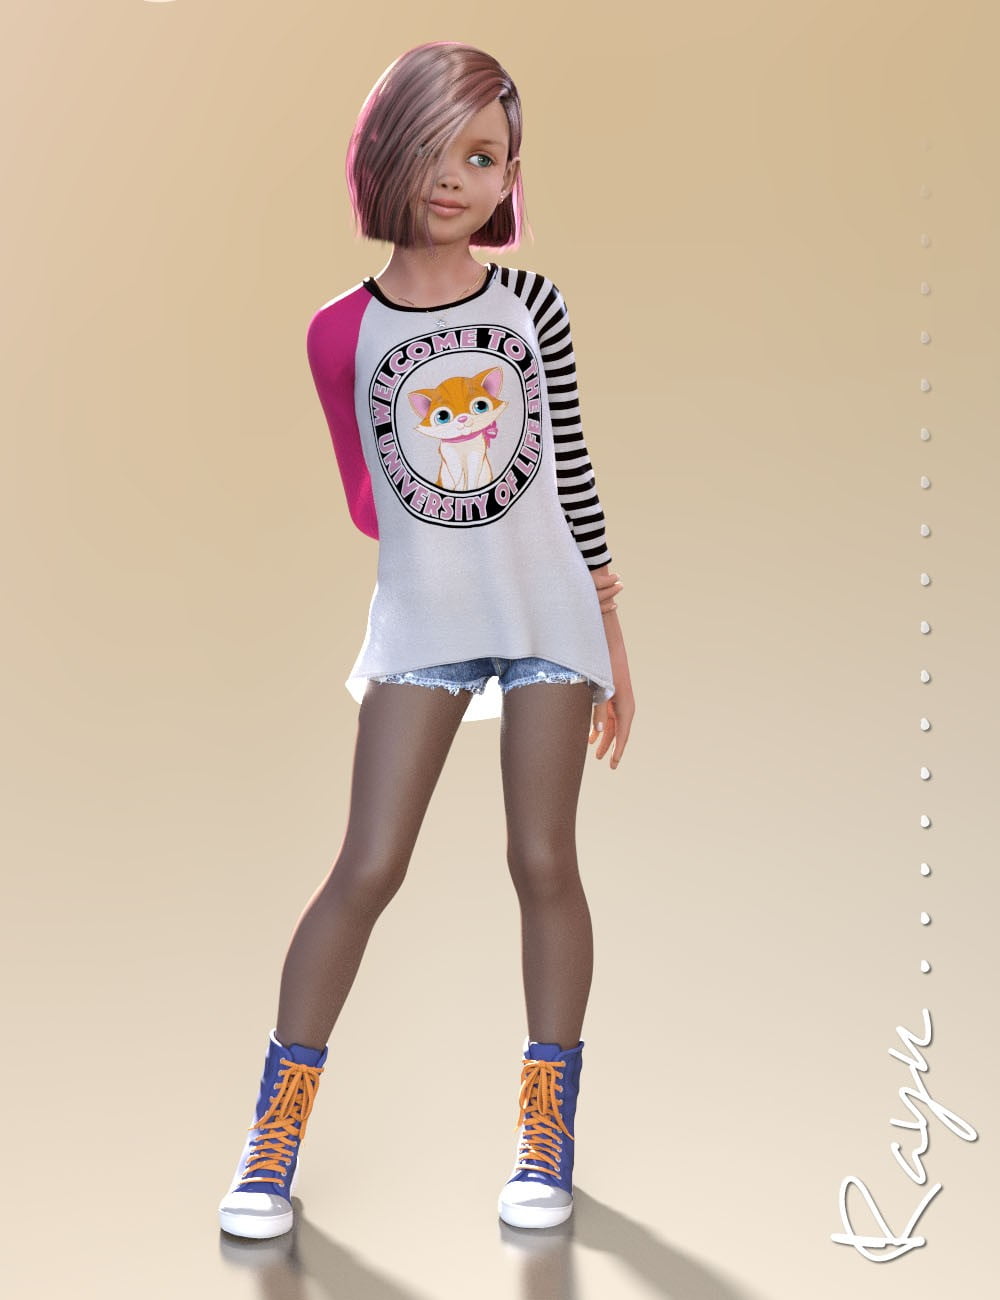 how to make clothes for daz models